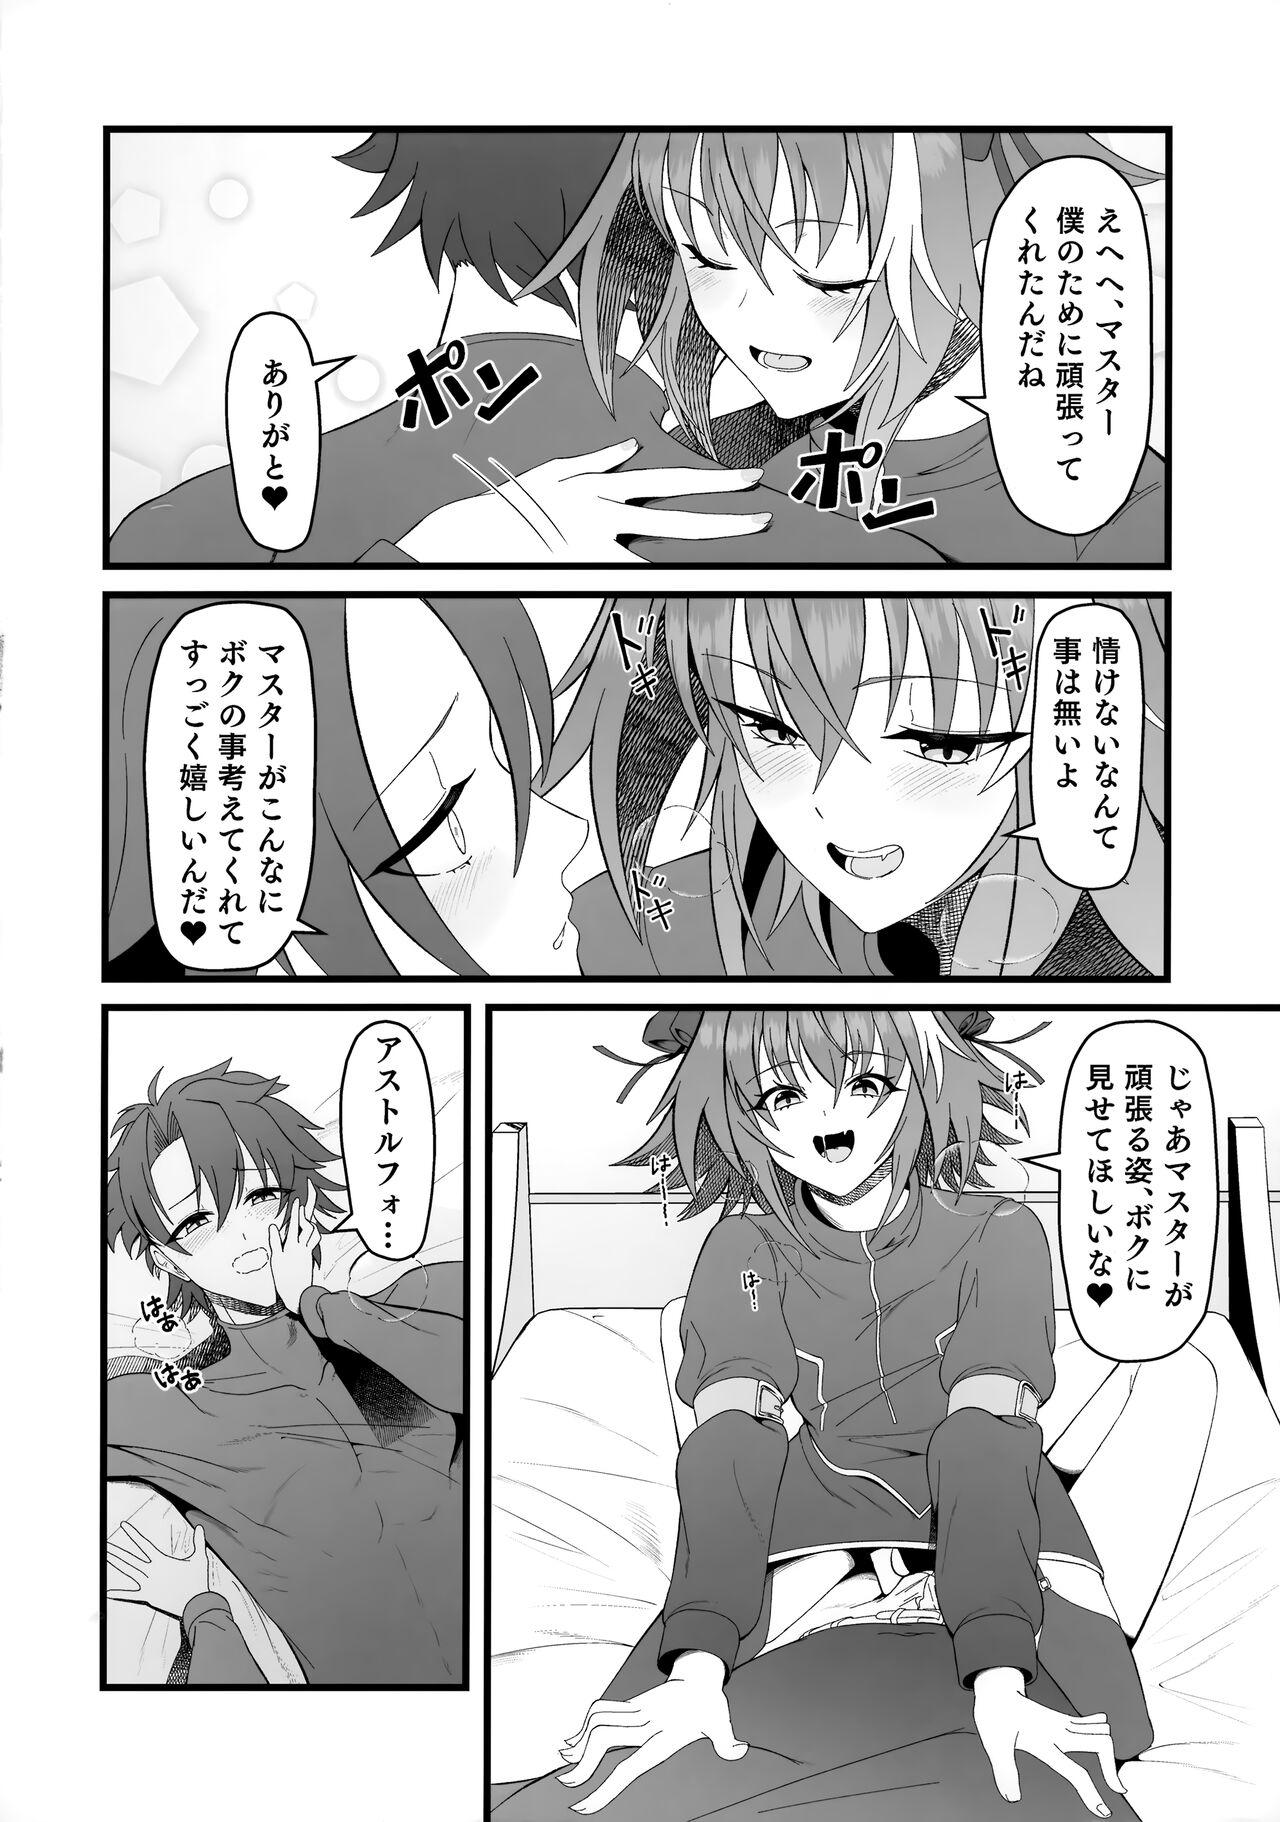 Animated Kimi no Ichiban ni Naritakute - I wanted to be your number one. - Fate grand order Clothed - Page 9